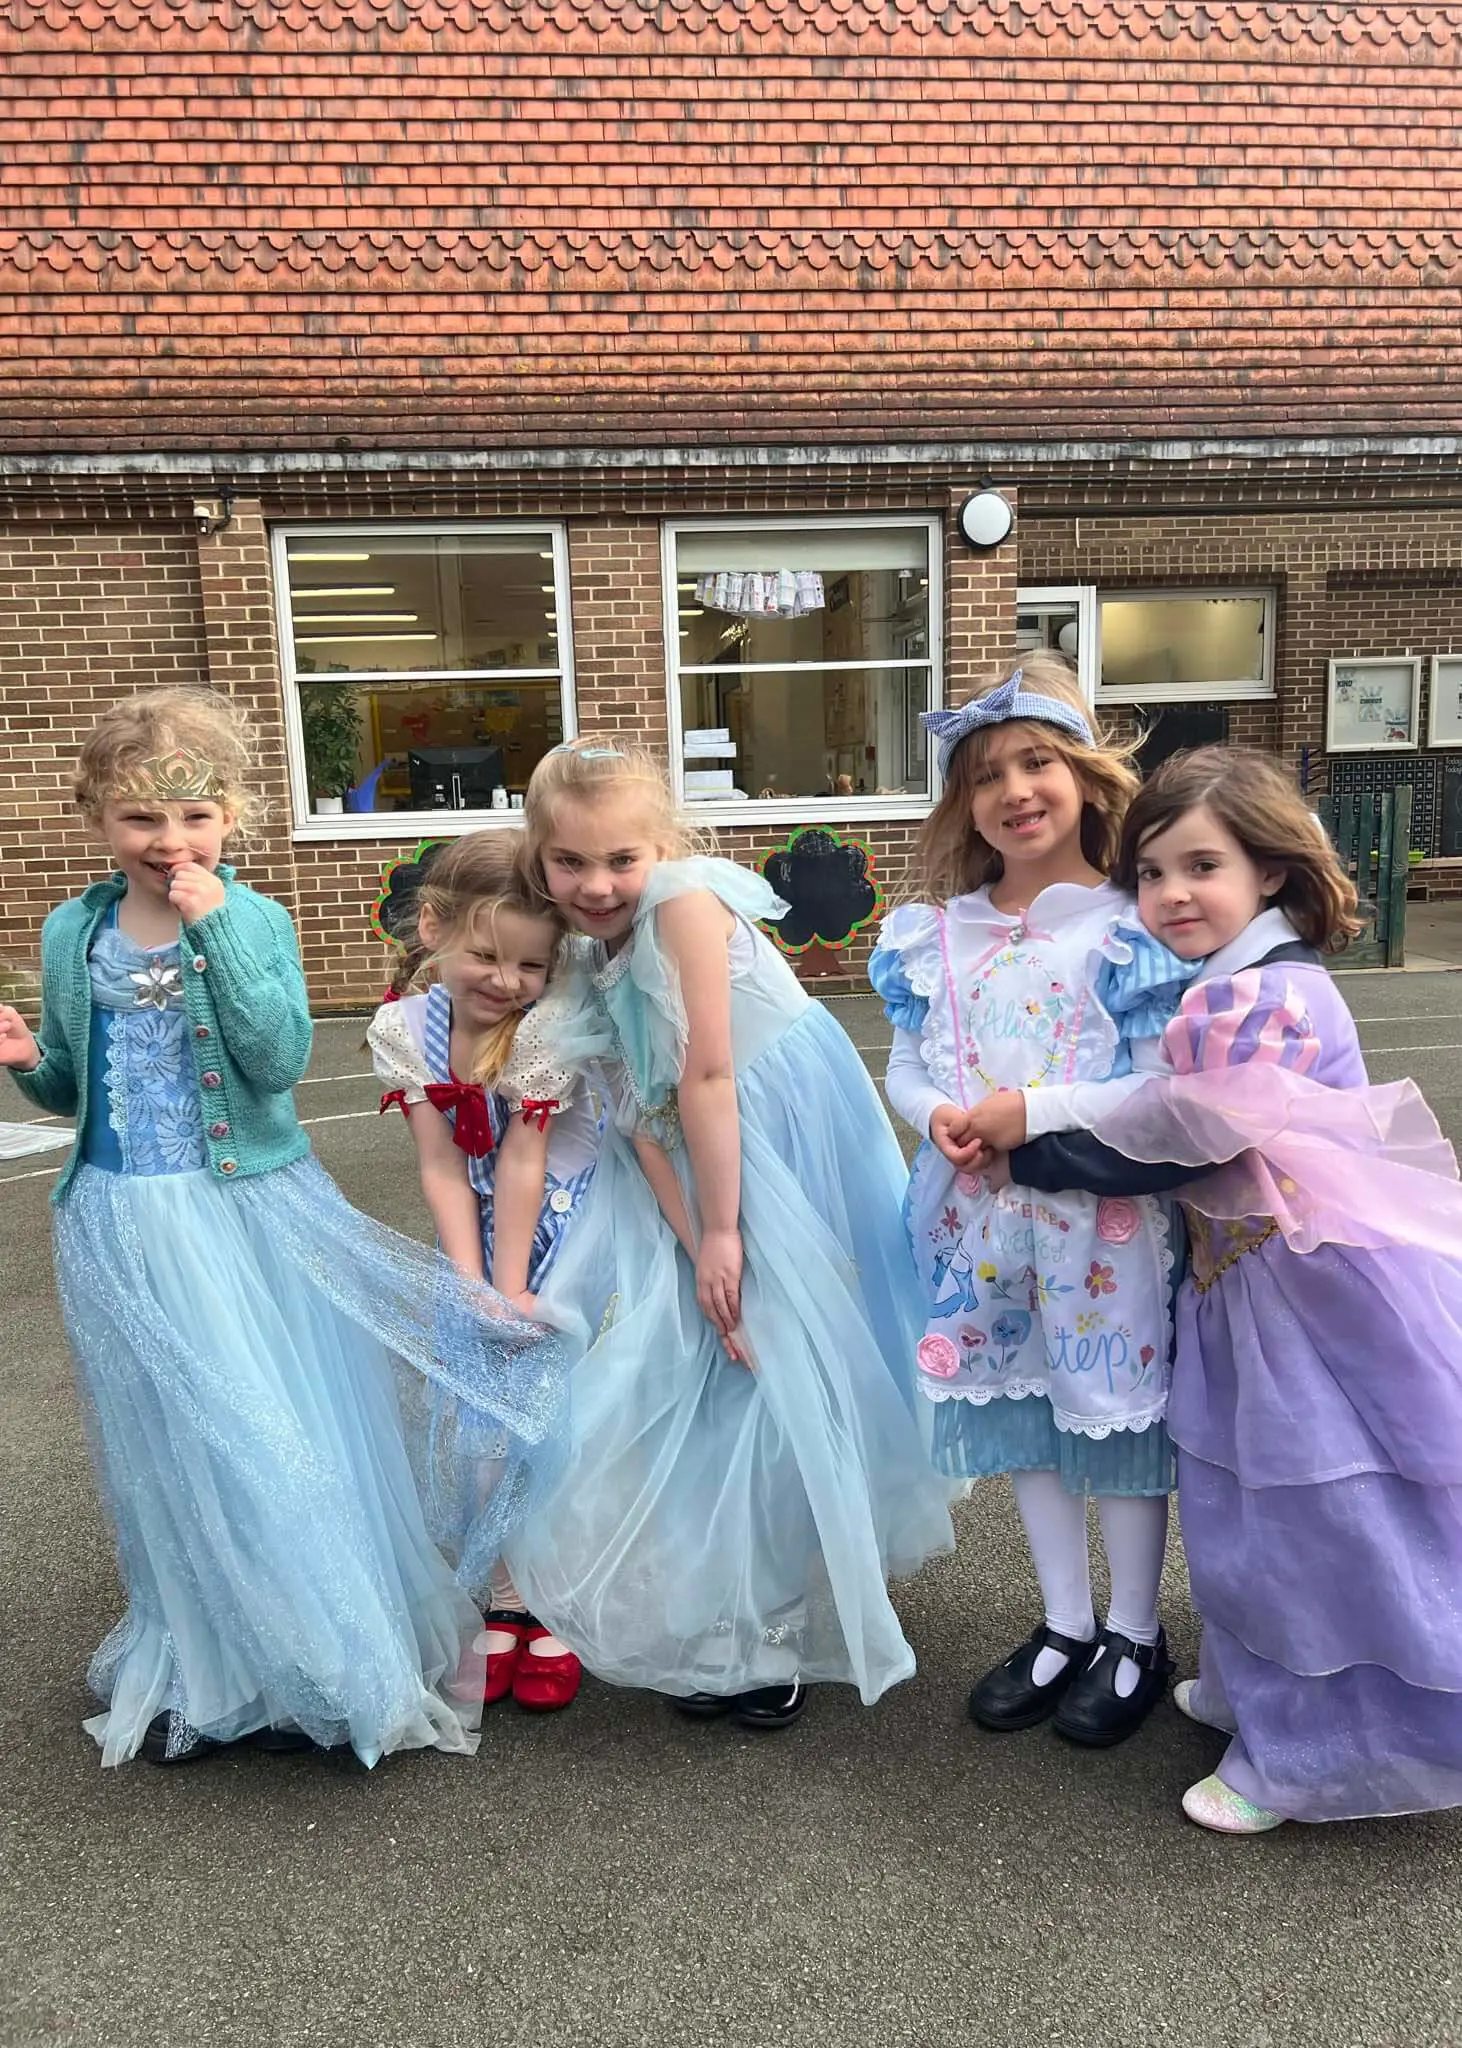 Children dressed up as Princesses for world book day at Ibstock Place School, Roehampton, a private school near Richmond, Barnes, Putney, Kingston, & Wandsworth